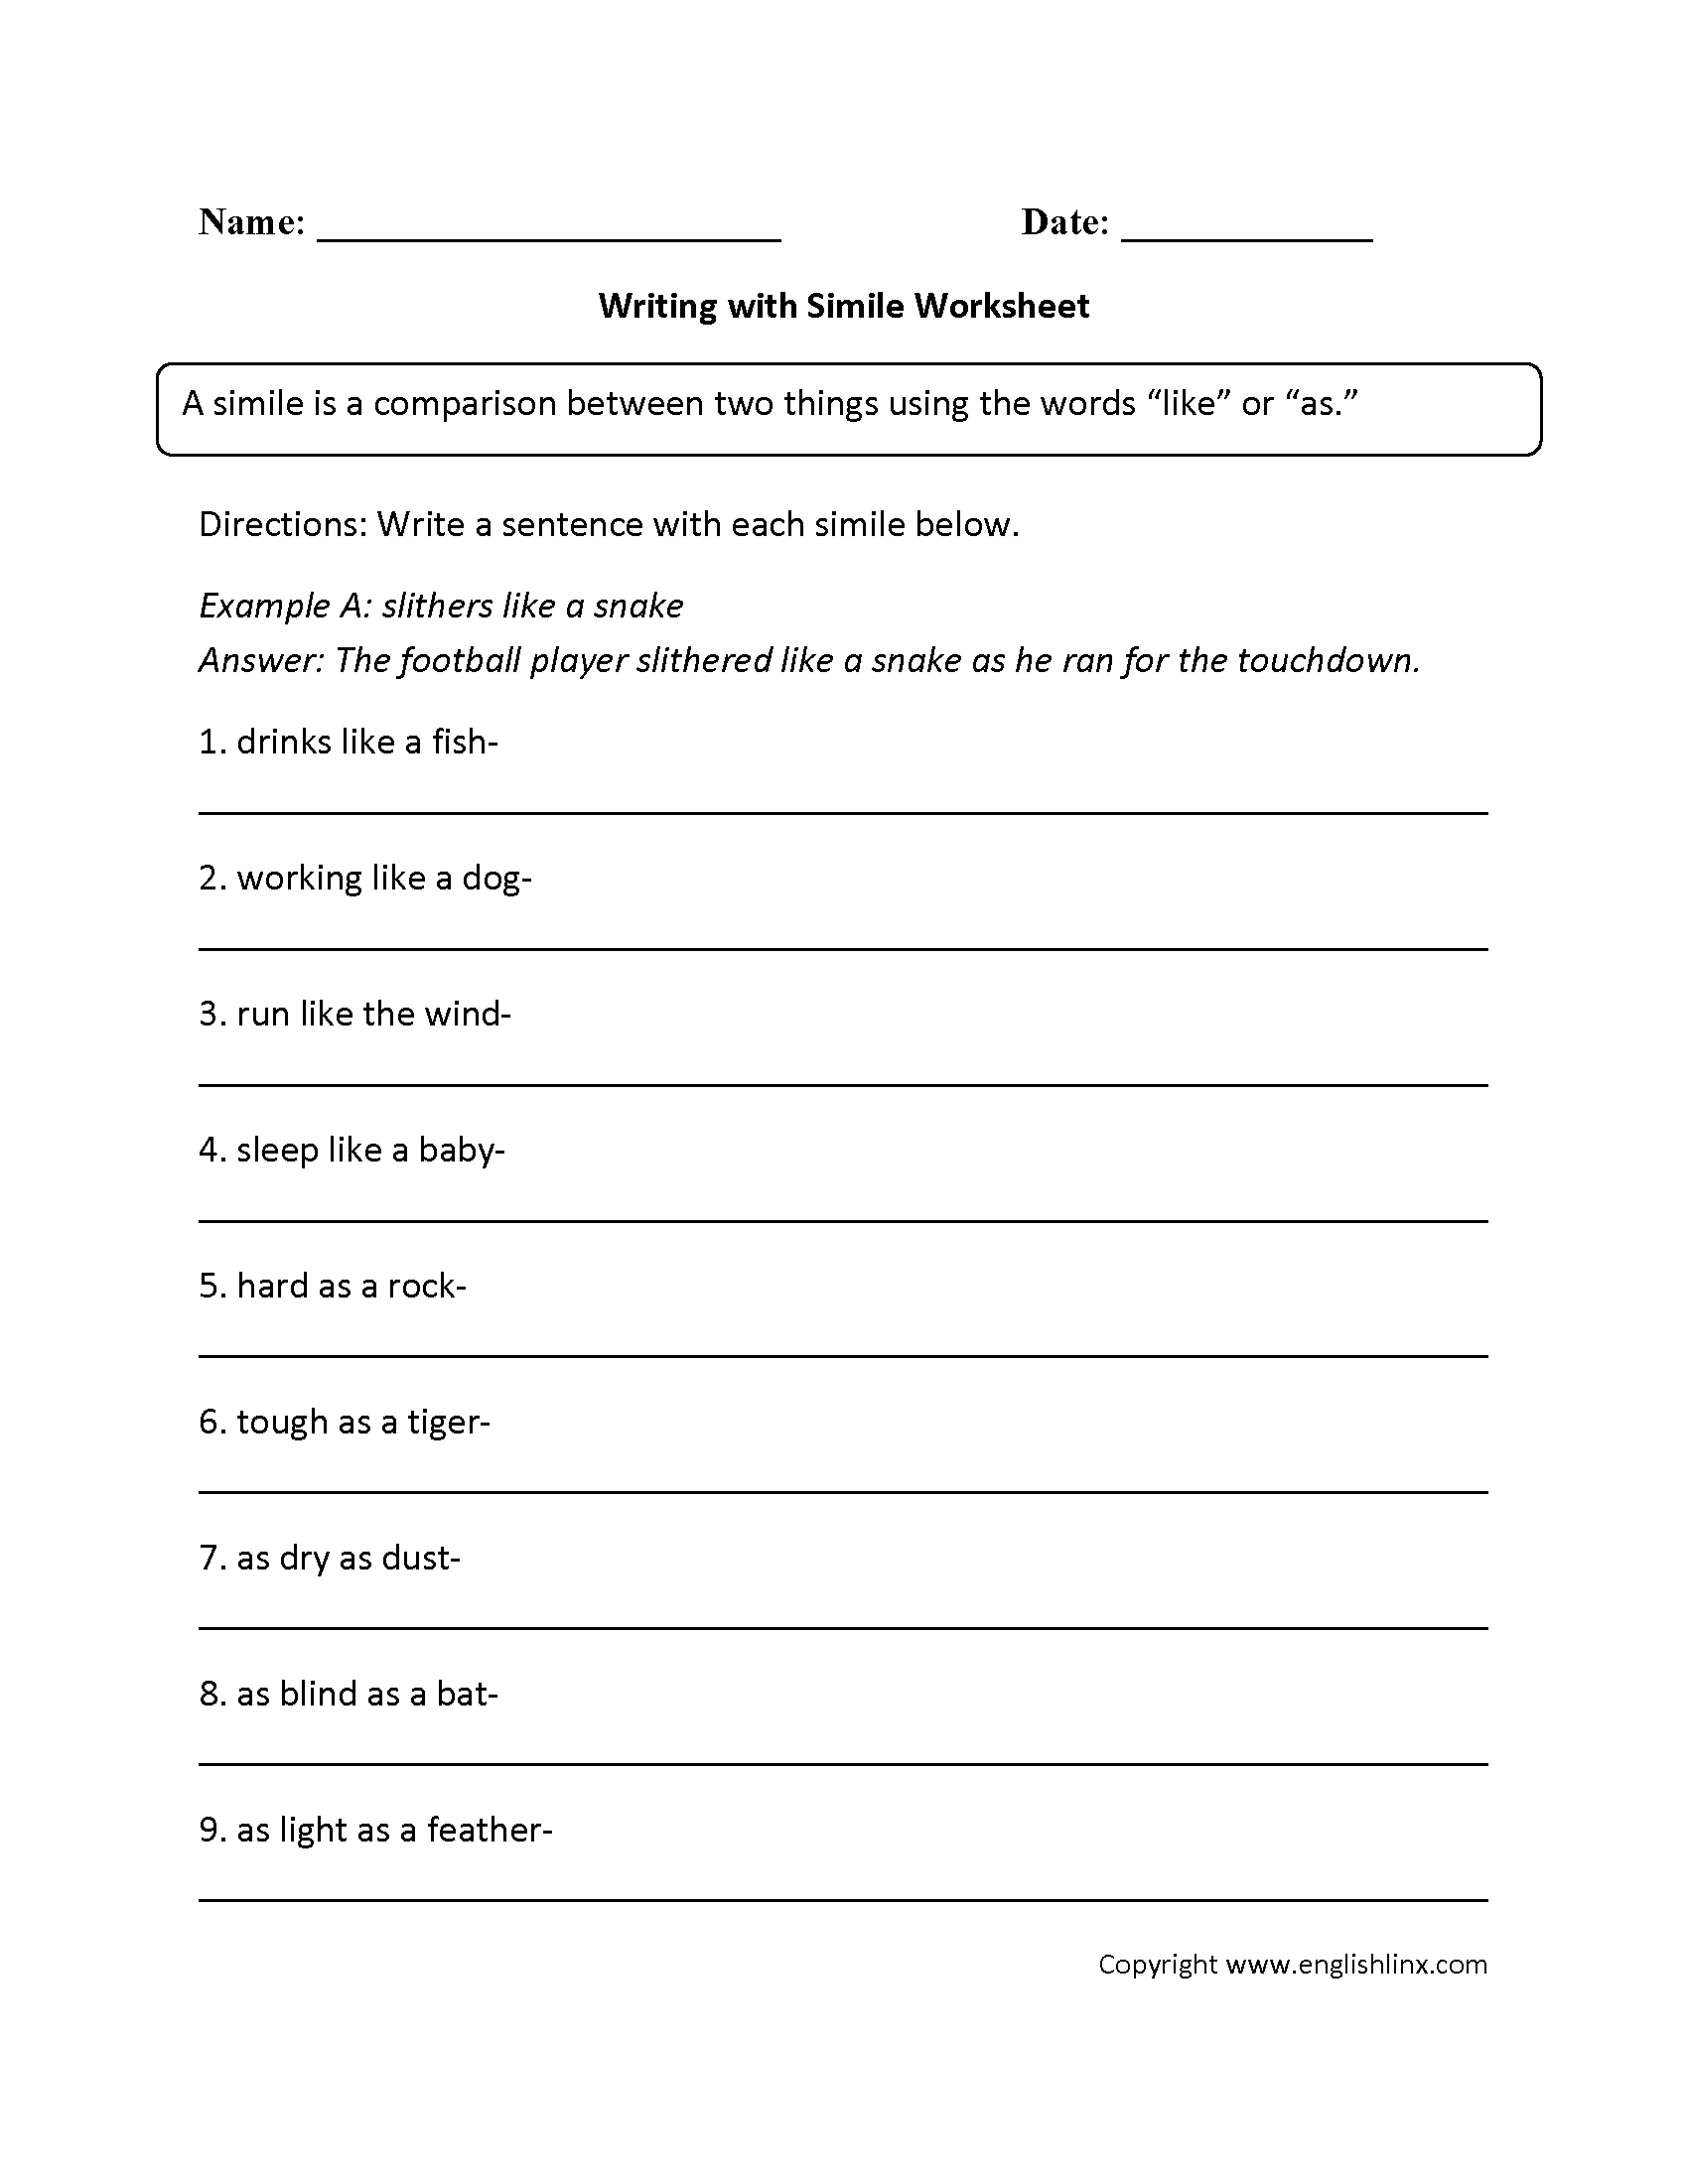 19-best-images-of-7th-grade-figurative-language-worksheet-figurative-language-worksheets-5th